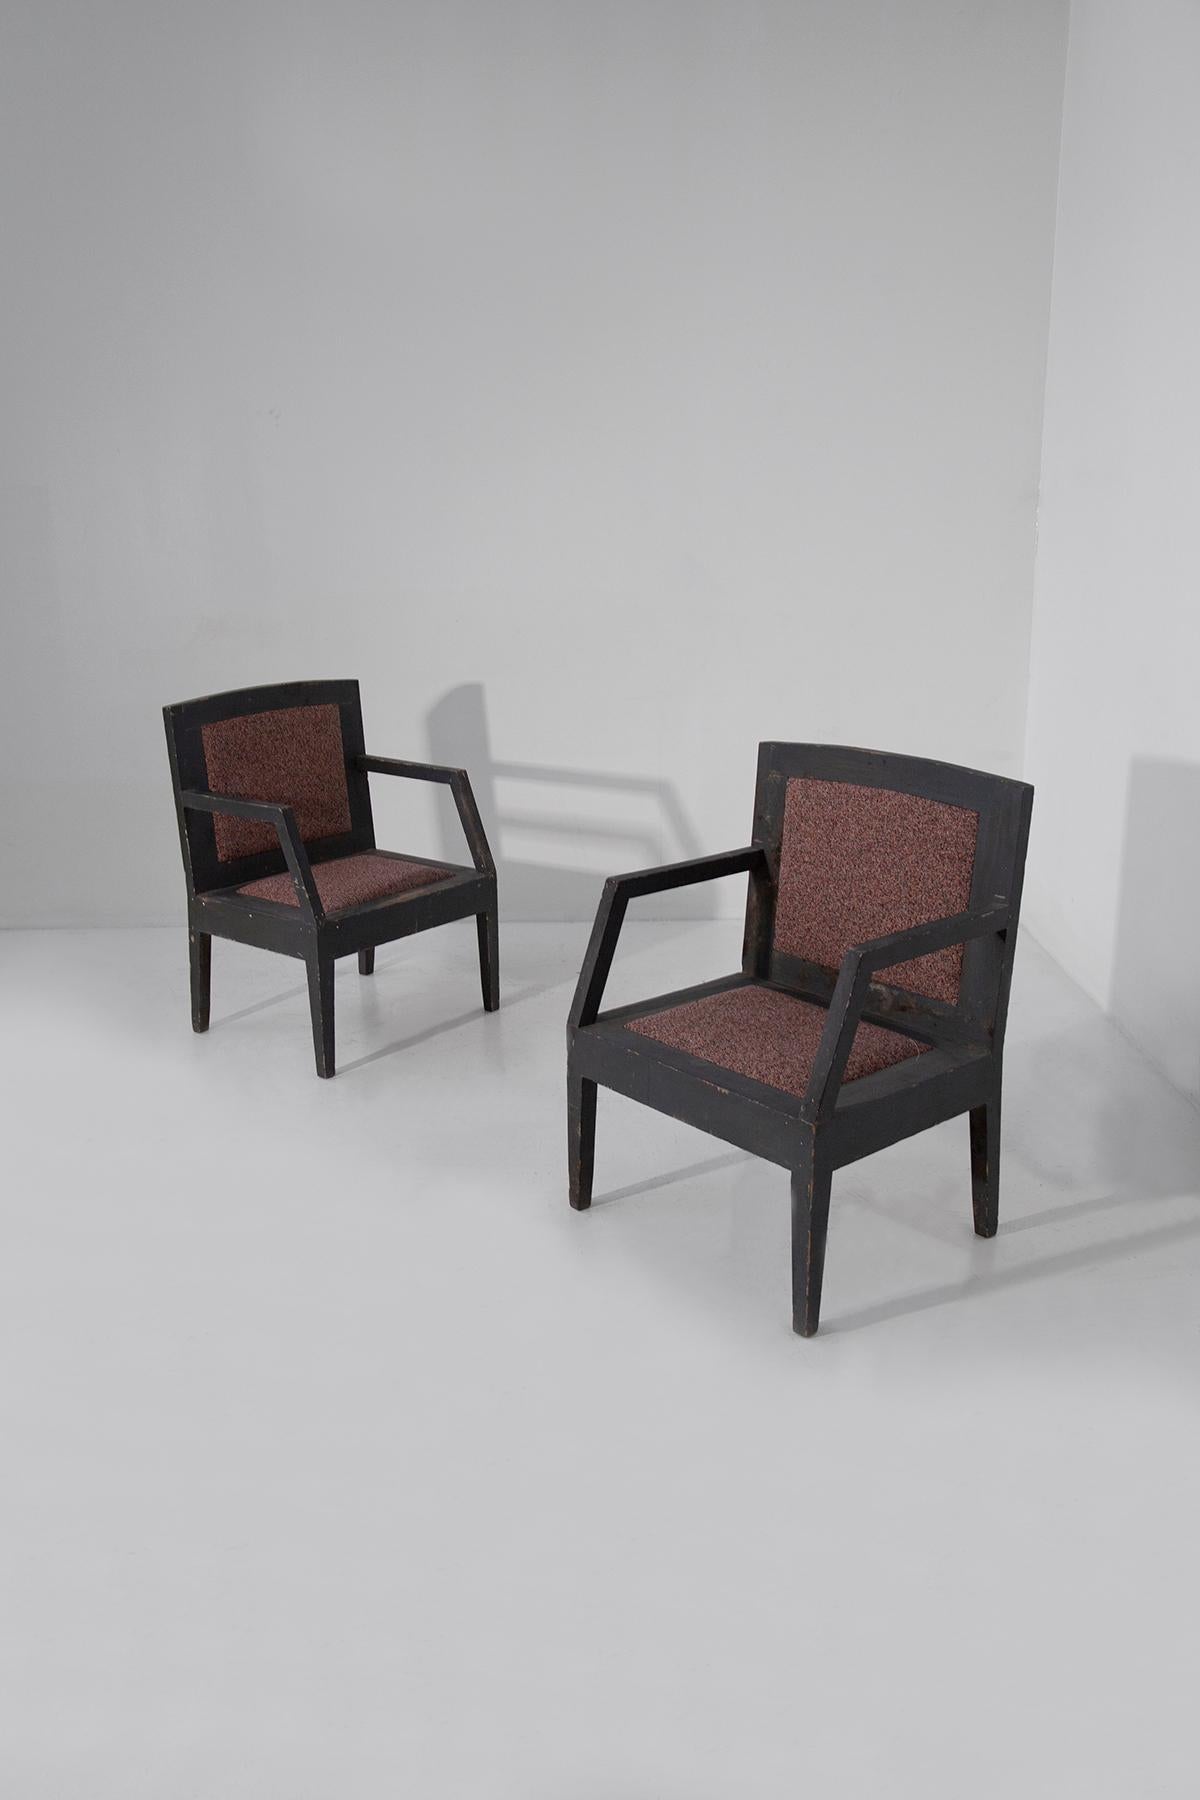 Step into a portal of artistic innovation and historical reverence with this remarkable pair of Italian Futurist armchairs, hailing from the dynamic period of 1910-1915. These chairs are not mere pieces of furniture; they are embodiments of a